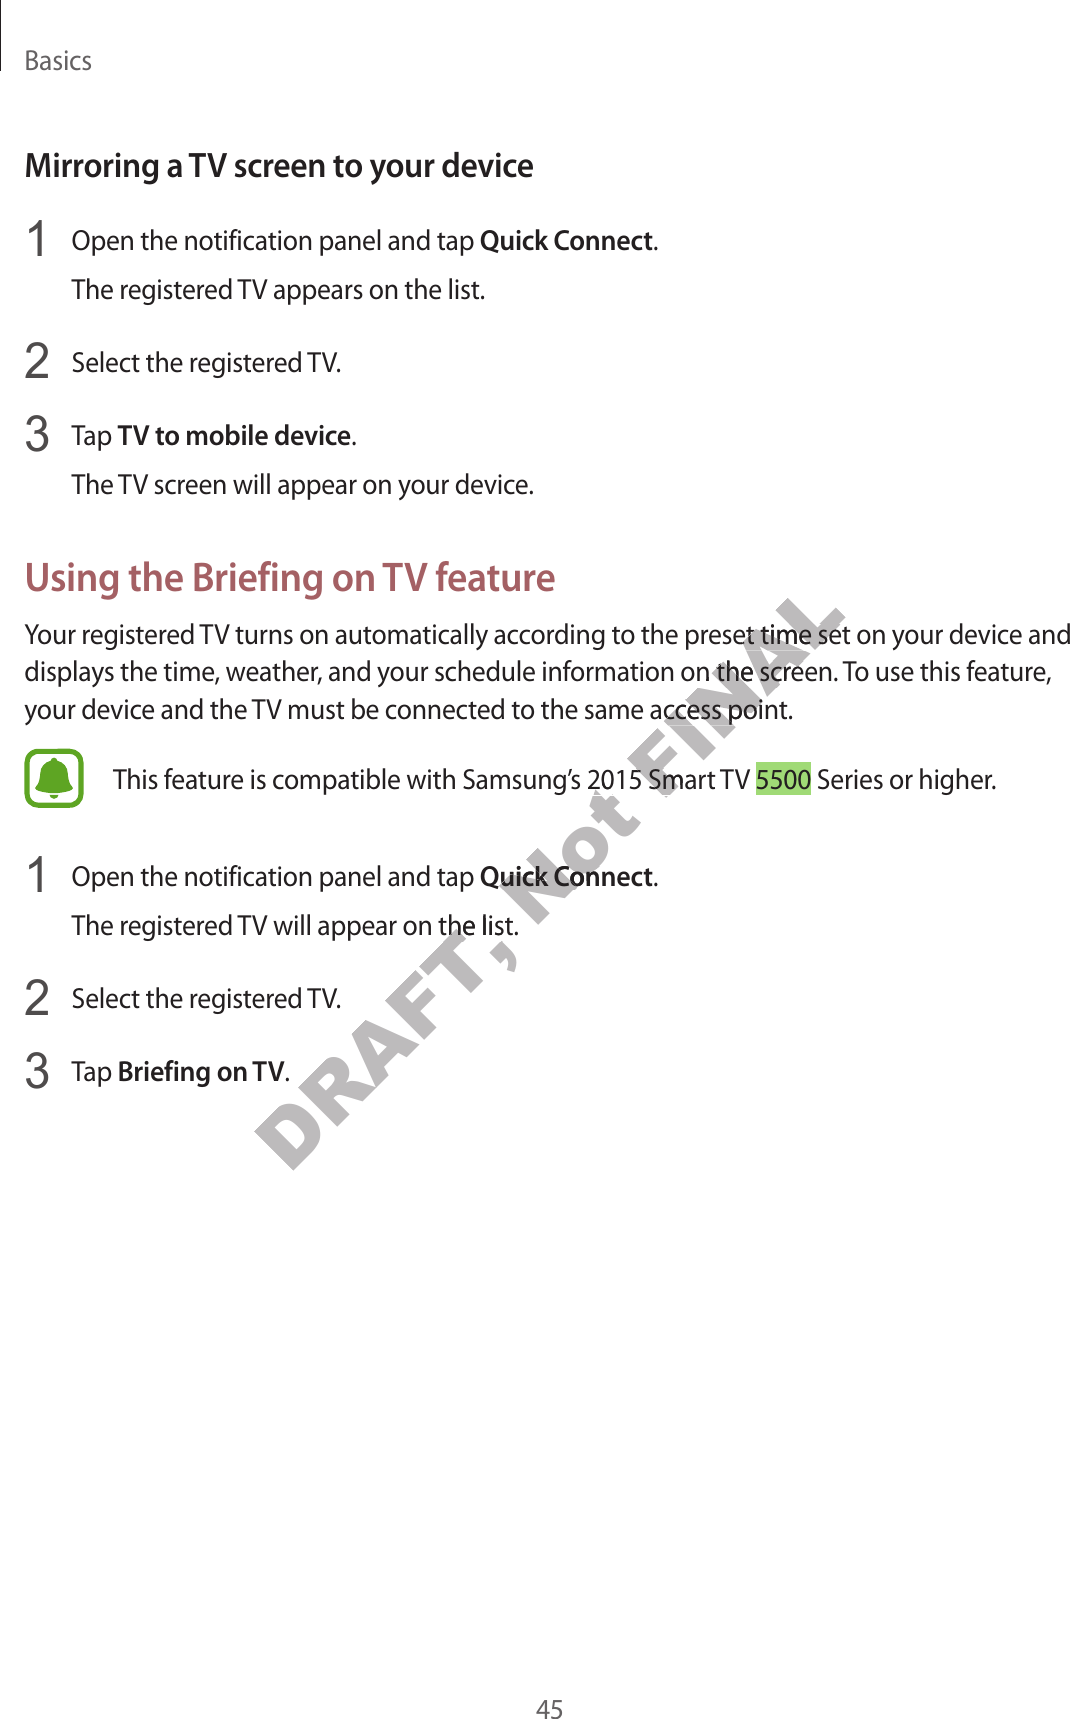 Basics45Mirroring a TV screen t o y our devic e1  Open the notification panel and tap Quick Connect.The reg ist er ed TV appears on the list.2  Select the regist er ed TV.3  Tap TV to mobile device.The TV screen will appear on y our devic e .Using the Briefing on TV featur eYour registered TV turns on automatically acc or ding t o the pr eset time set on y our device and displays the time , w ea ther, and your schedule information on the scr een. To use this feature , your device and the TV must be connected to the same acc ess point .This f eatur e is c ompatible with Samsung’s 2015 Smart  TV 5500 Series or higher.1  Open the notification panel and tap Quick Connect.The reg ist er ed TV will appear on the list.2  Select the regist er ed TV.3  Tap Briefing on TV.DRAFT, The reg ist er ed TV will appear on the list.DRAFT, The reg ist er ed TV will appear on the list.Not This f eatur e is c ompatible with Samsung’s 2015 Smart  TV Not This f eatur e is c ompatible with Samsung’s 2015 Smart  TV Not Quick ConnectNot Quick ConnectFINALYour registered TV turns on automatically acc or ding t o the pr eset time set on y our device and FINALYour registered TV turns on automatically acc or ding t o the pr eset time set on y our device and displays the time , w ea ther, and your schedule information on the scr een. To use this feature , FINALdisplays the time , w ea ther, and your schedule information on the scr een. To use this feature , your device and the TV must be connected to the same acc ess point .FINALyour device and the TV must be connected to the same acc ess point .This f eatur e is c ompatible with Samsung’s 2015 Smart  TV FINALThis f eatur e is c ompatible with Samsung’s 2015 Smart  TV 